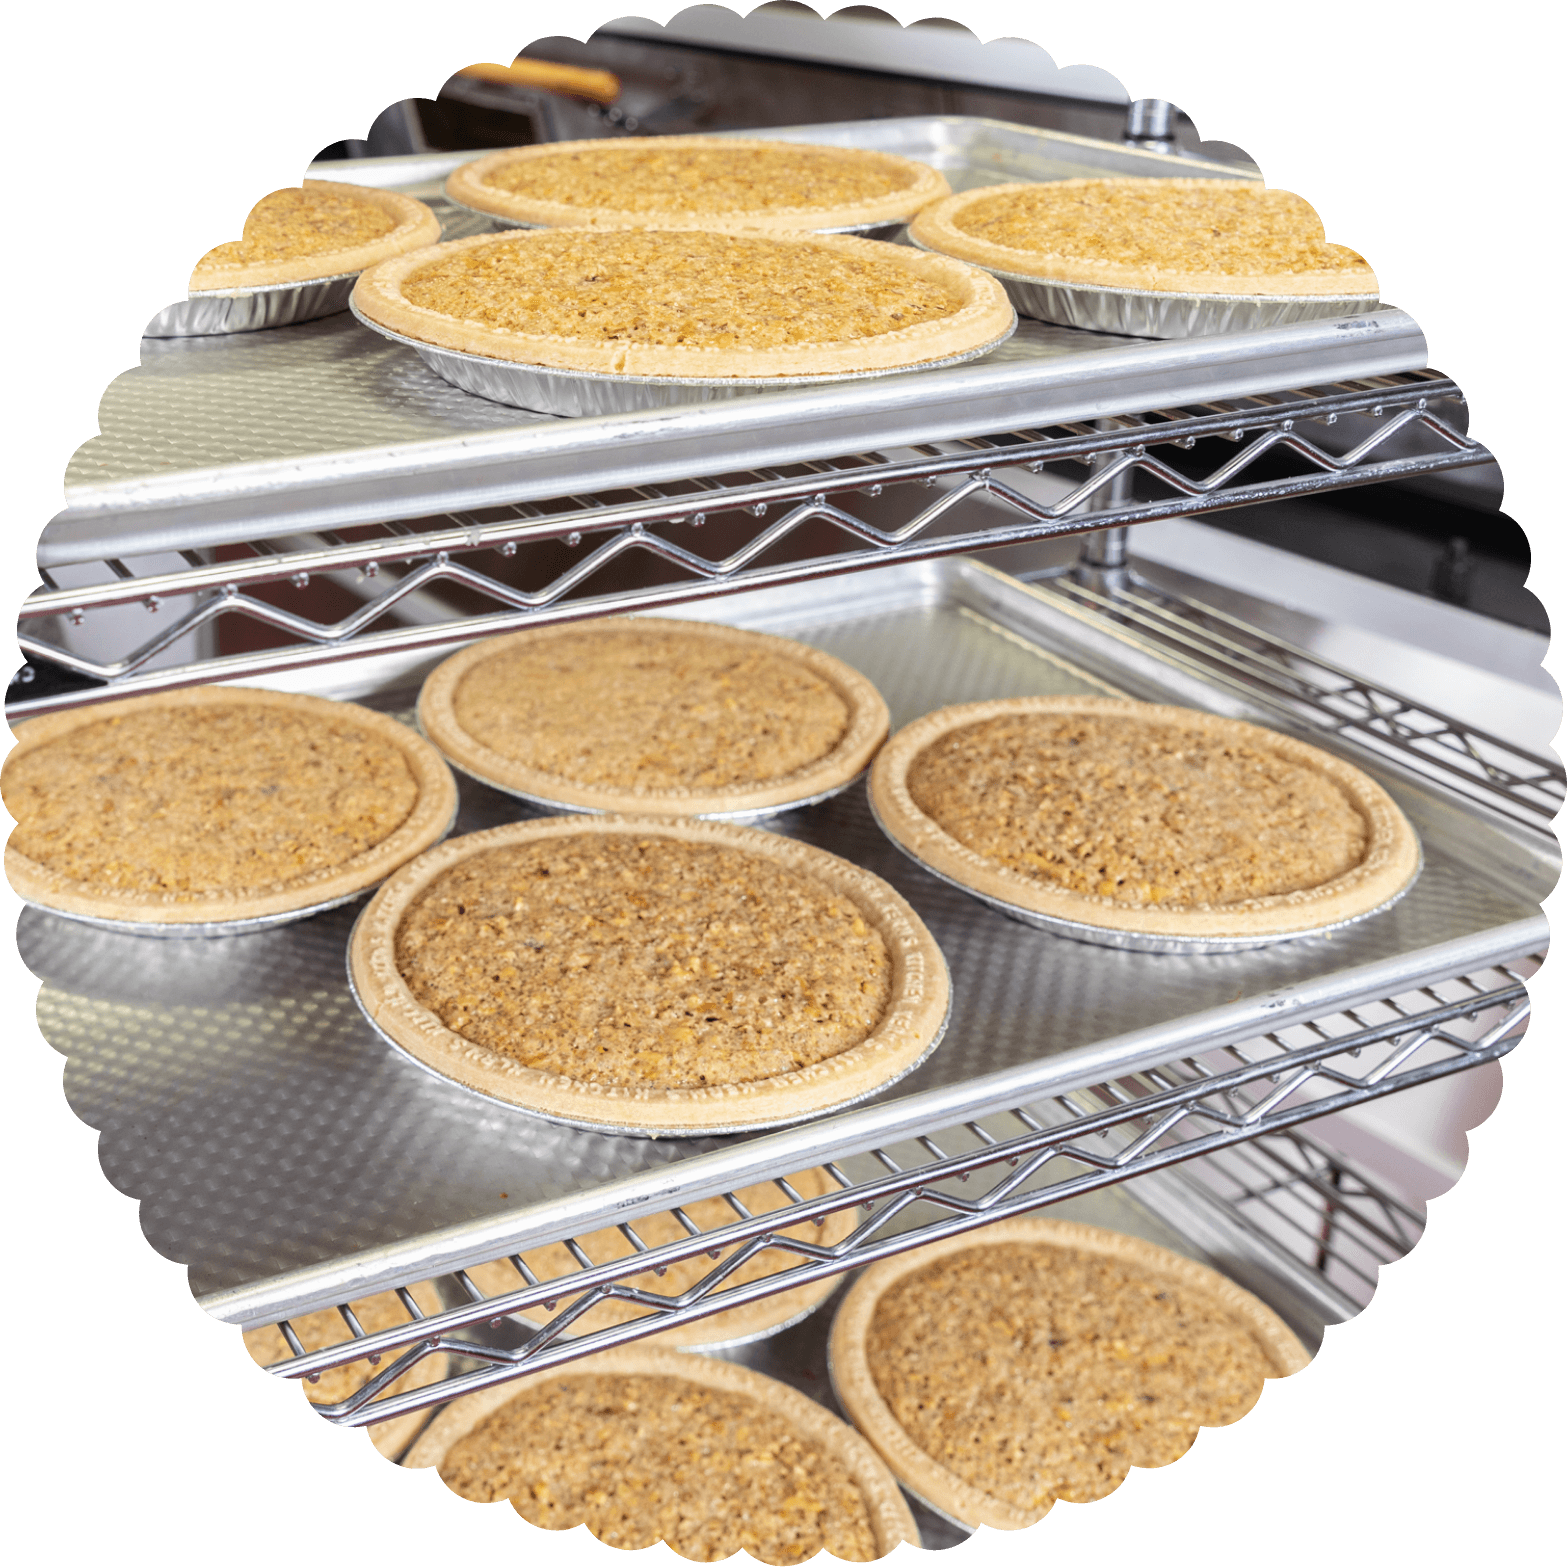 Pies baking on an oven rack